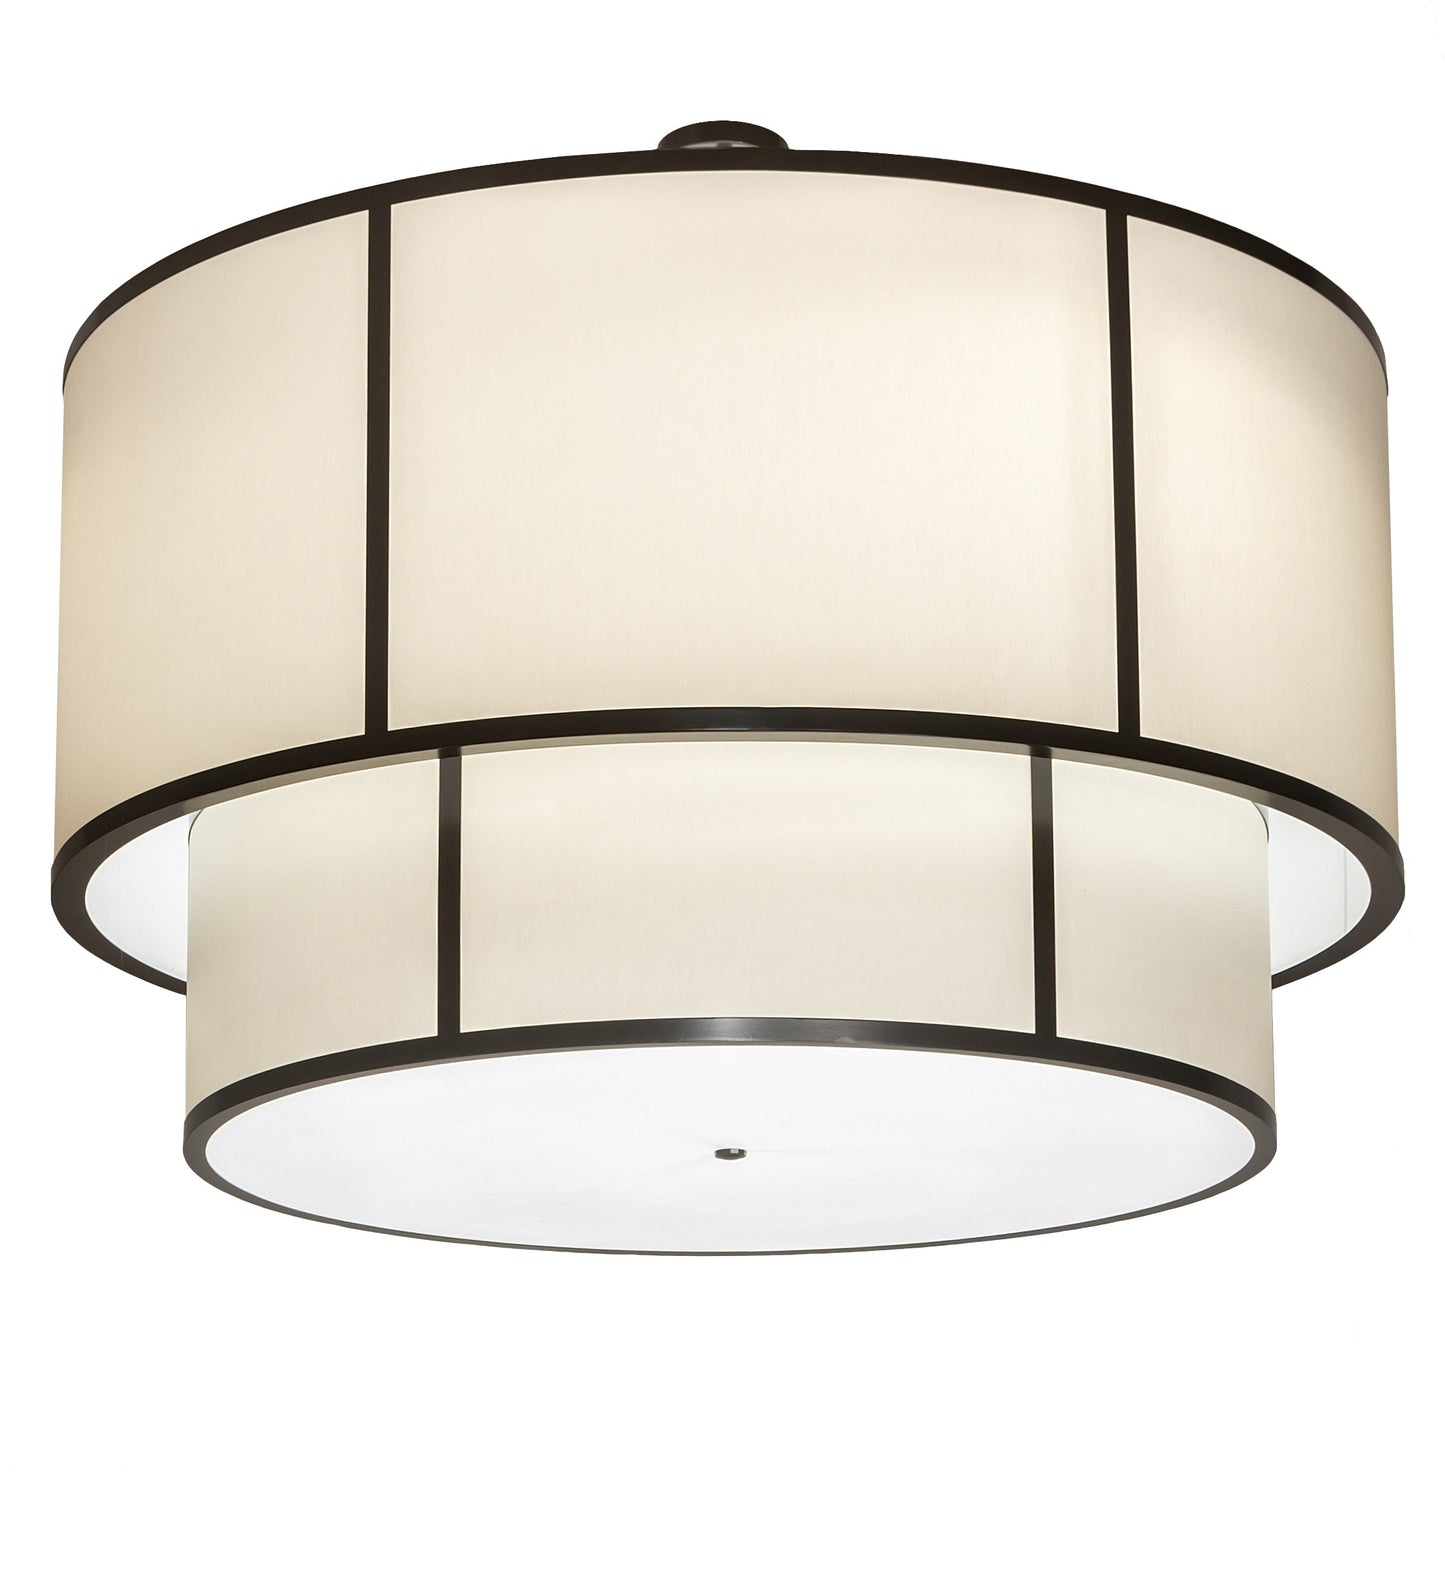 60" Cilindro 2 Tier Pendant by 2nd Ave Lighting